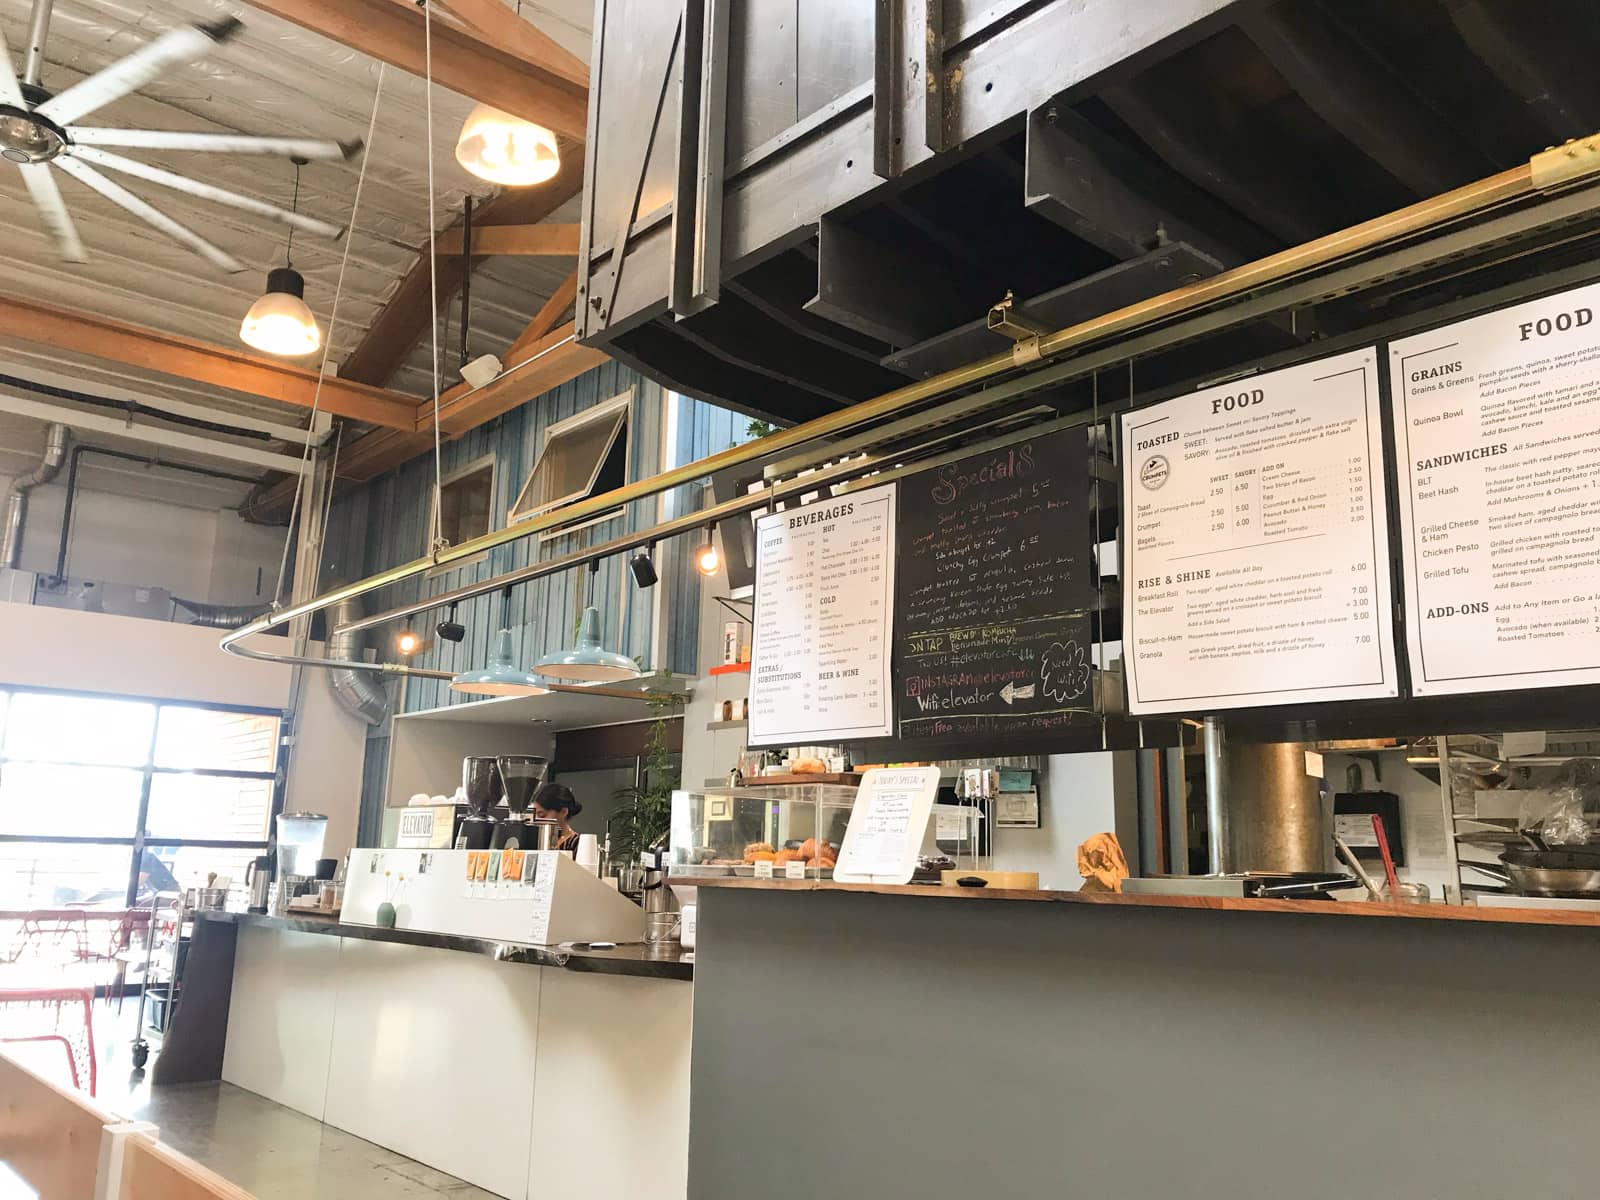 A cafe counter with a menu above the counter. Hanging lighting and fans can be seen from the ceiling.